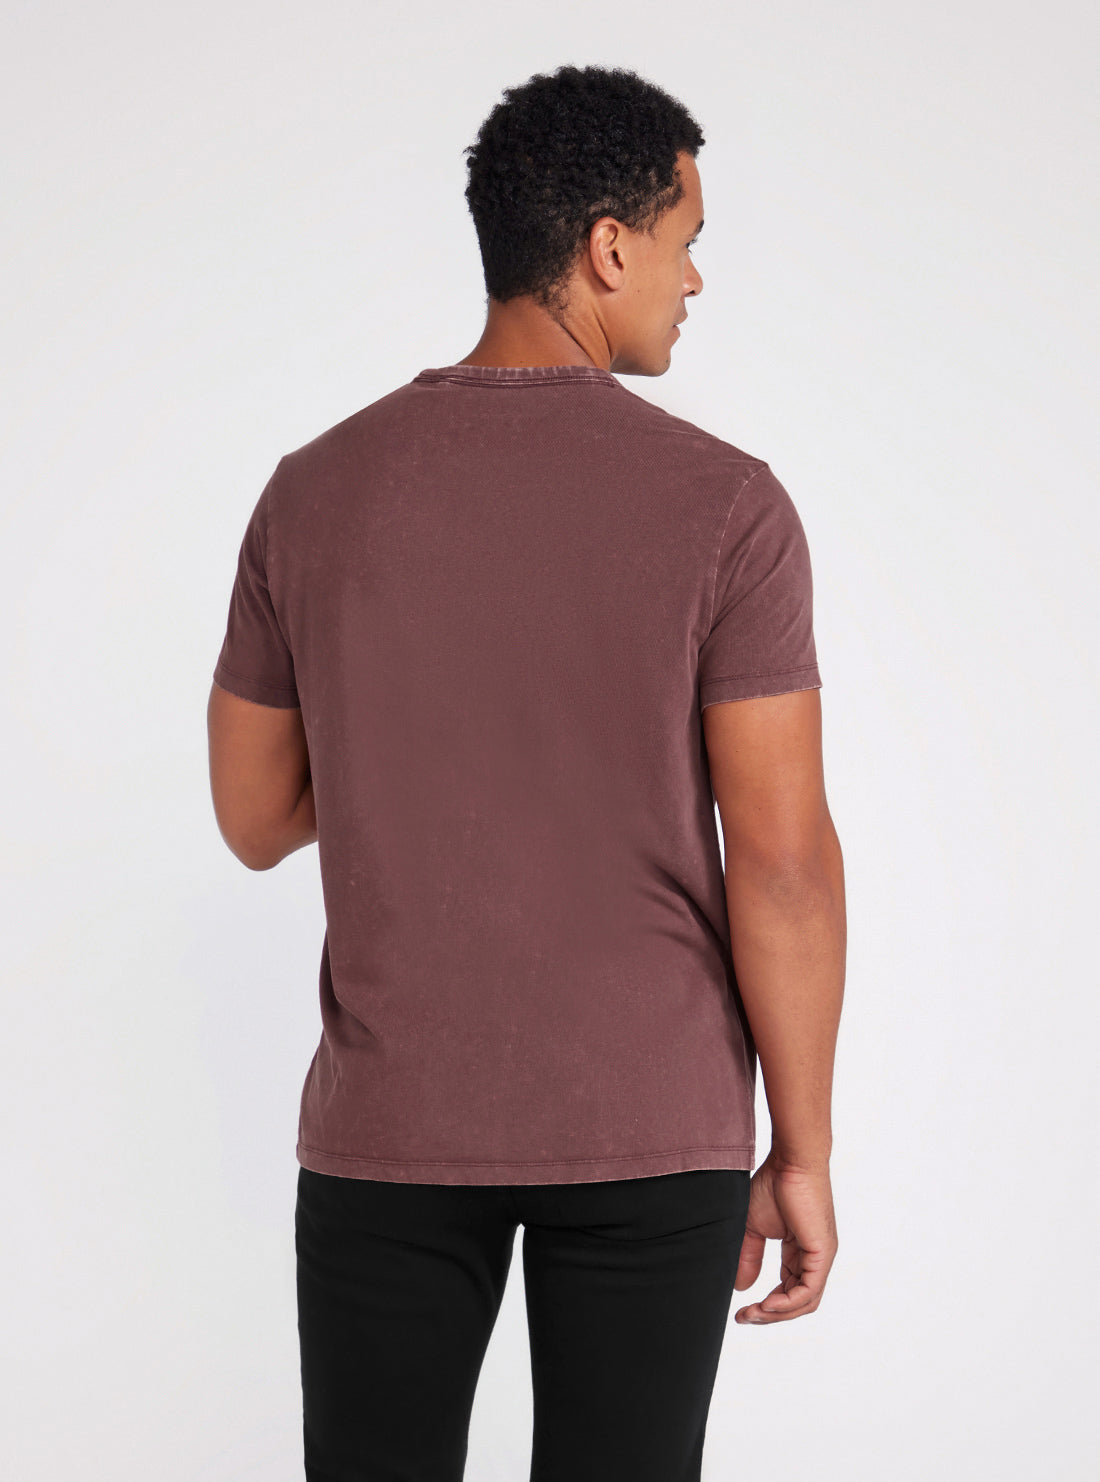 Maroon Embroidered Washed Logo T-Shirt | GUESS men's apparel | back view